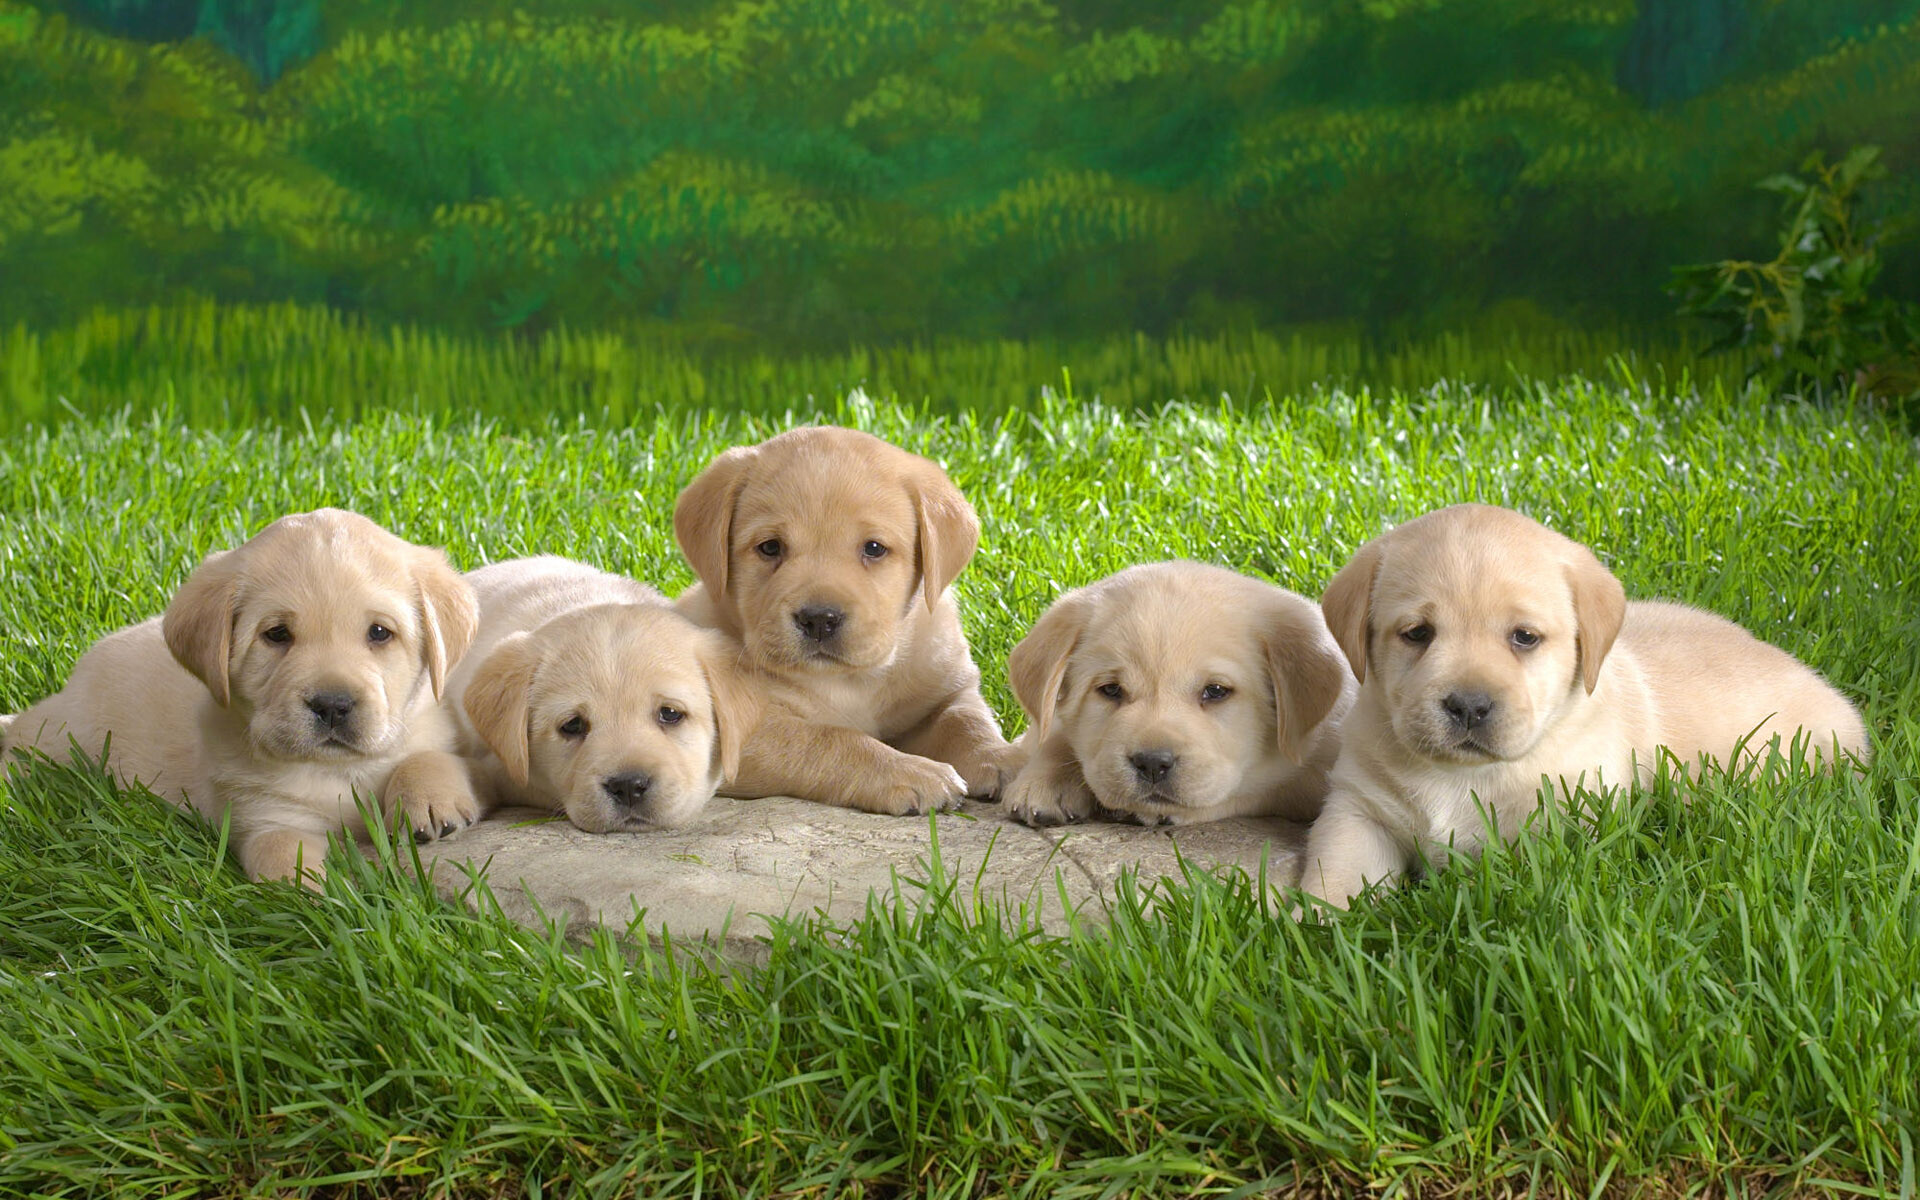 Labrador Retriever: Puppy, Can thrive as farm dogs, working dogs, security dogs, or as family pets. 1920x1200 HD Wallpaper.